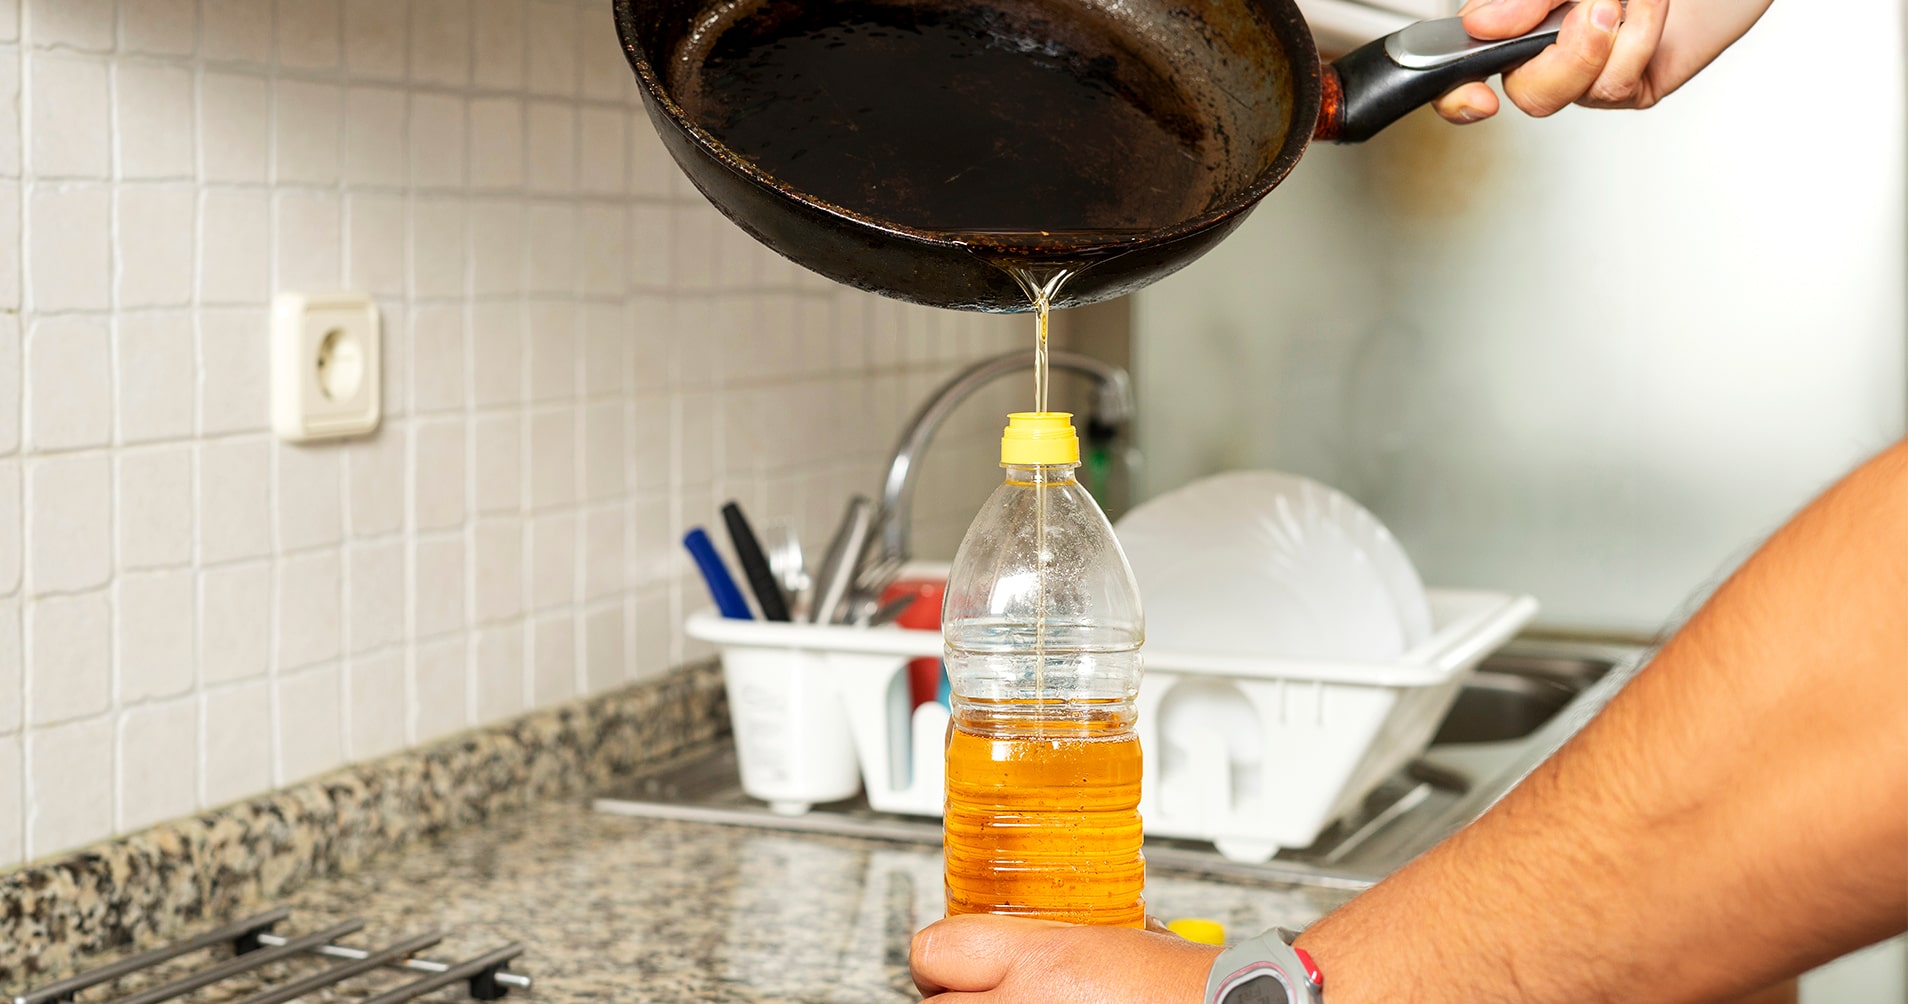 Easy Tips for Managing Used Cooking Oil to Prevent Water and Soil Pollution